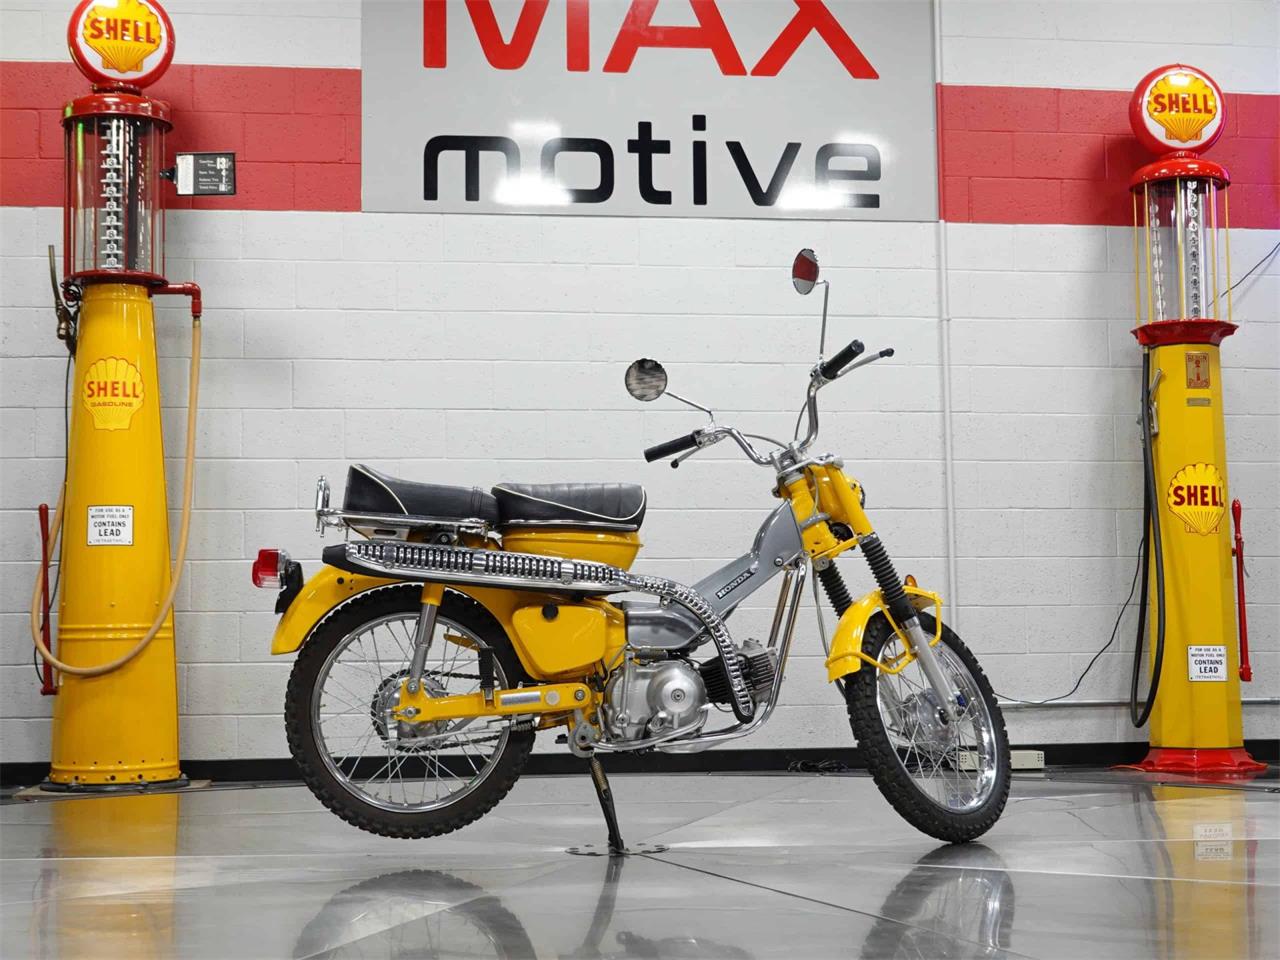 1969 Honda Motorcycle for sale in Pittsburgh, PA